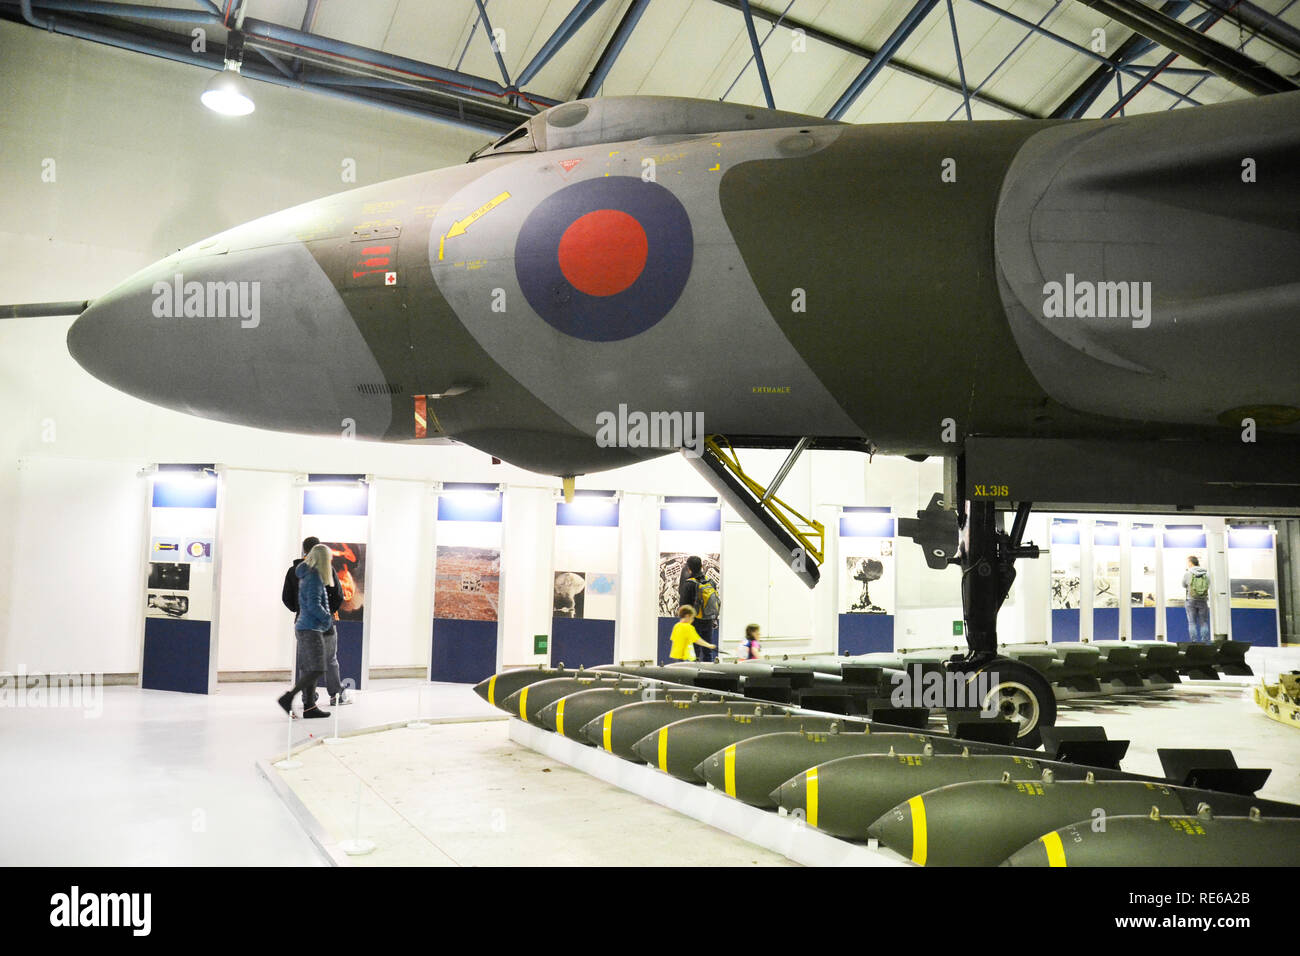 Vulcan WWII Military Bomber Aircraft on display at the RAF Museum, London, UK Stock Photo